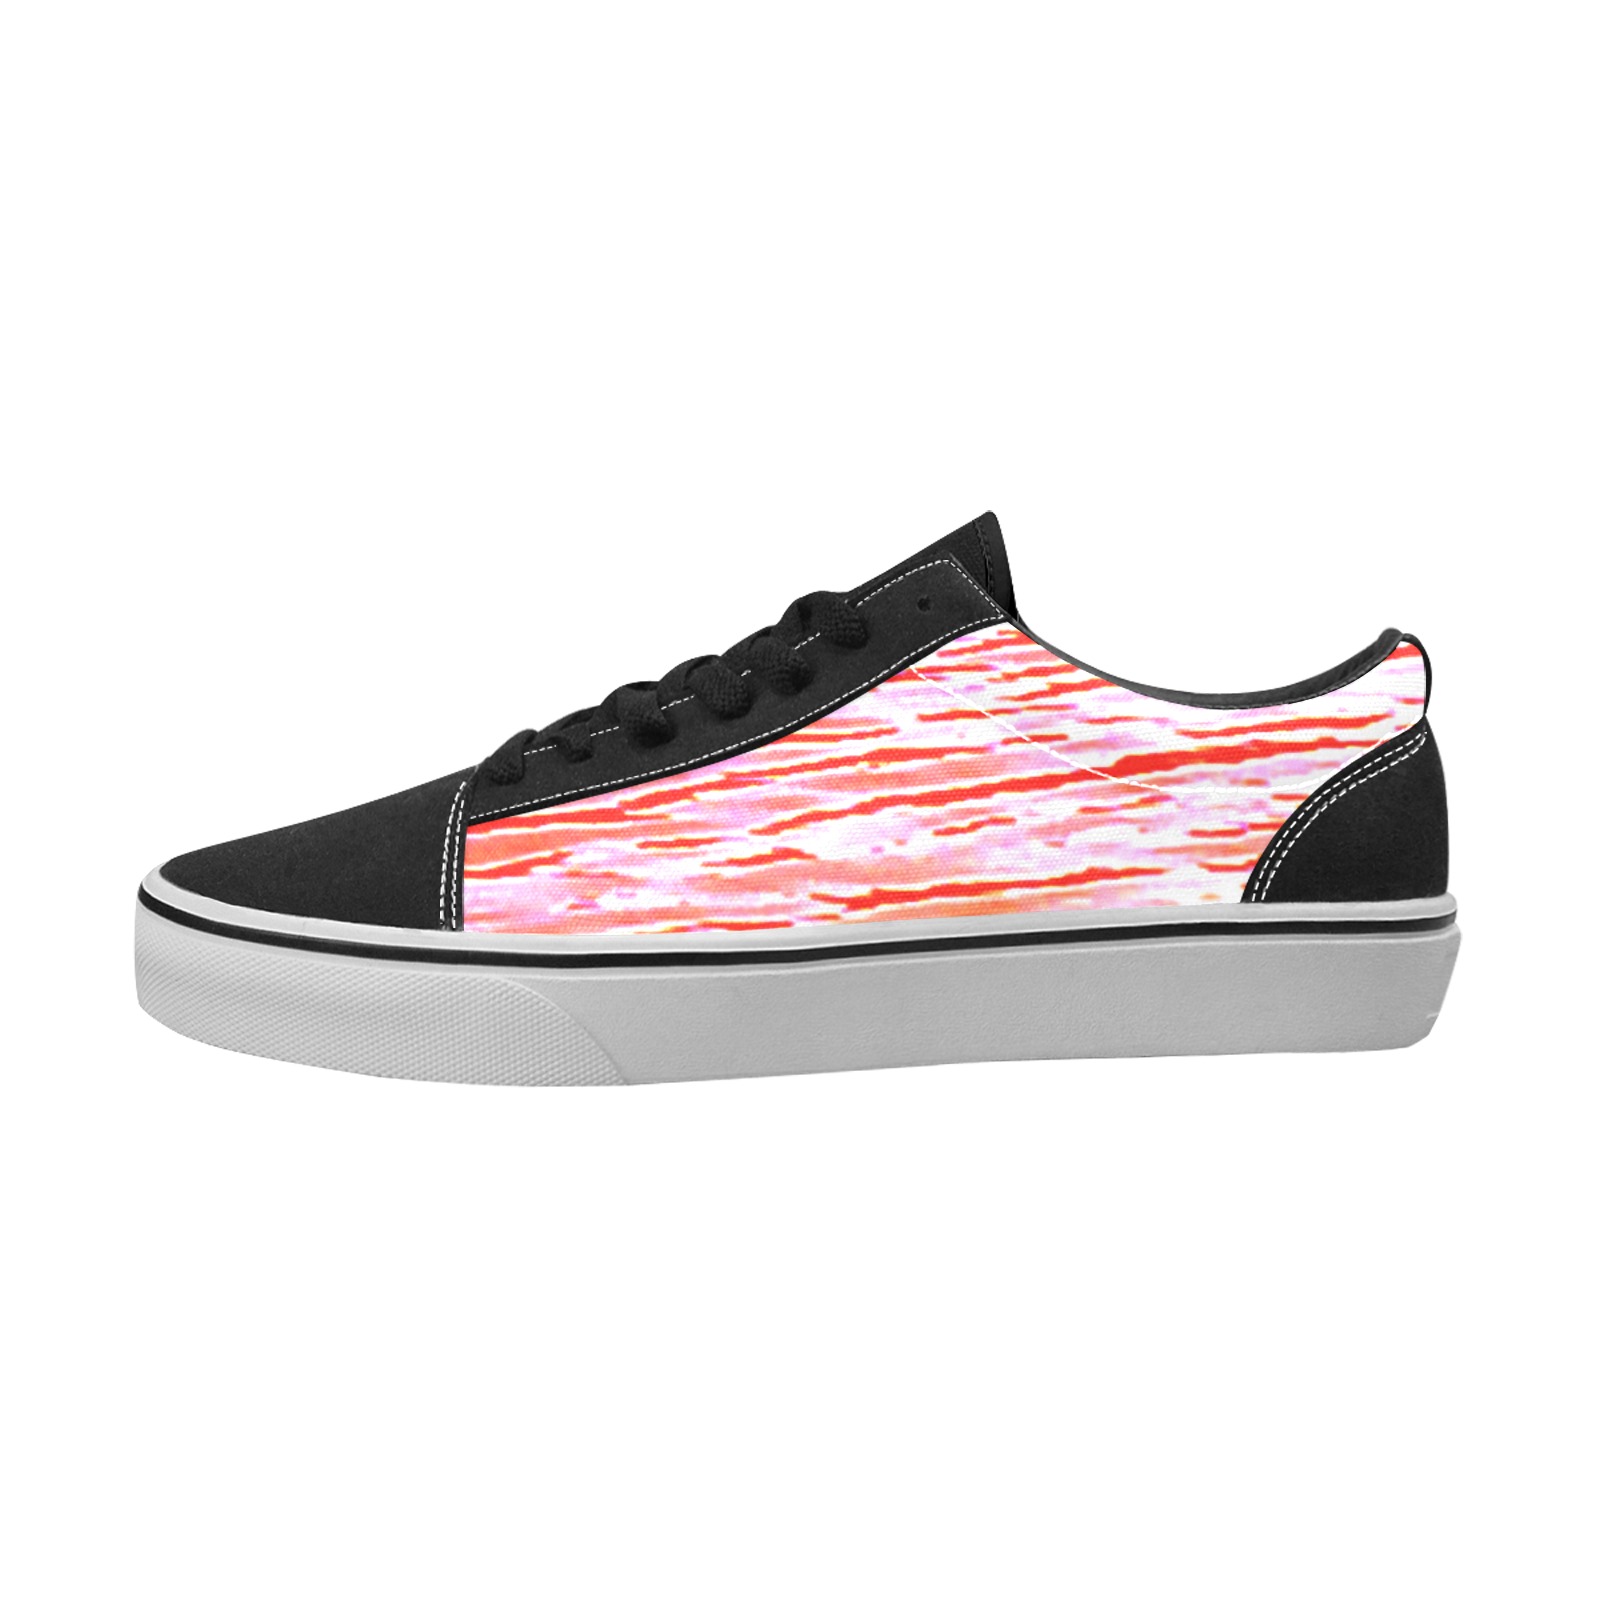 Orange and red water Men's Low Top Skateboarding Shoes (Model E001-2)